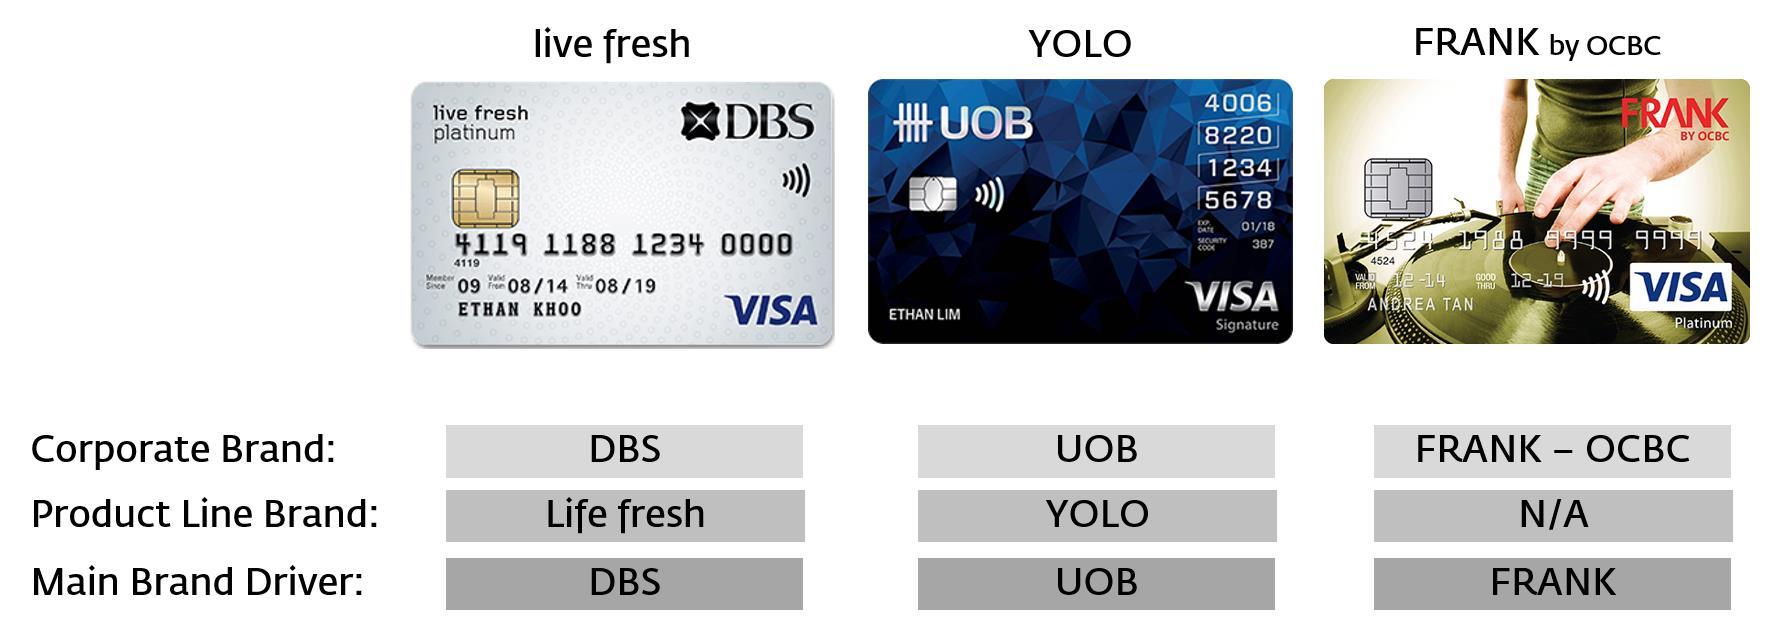 Credit card: live fresh, YOLO and FRANK